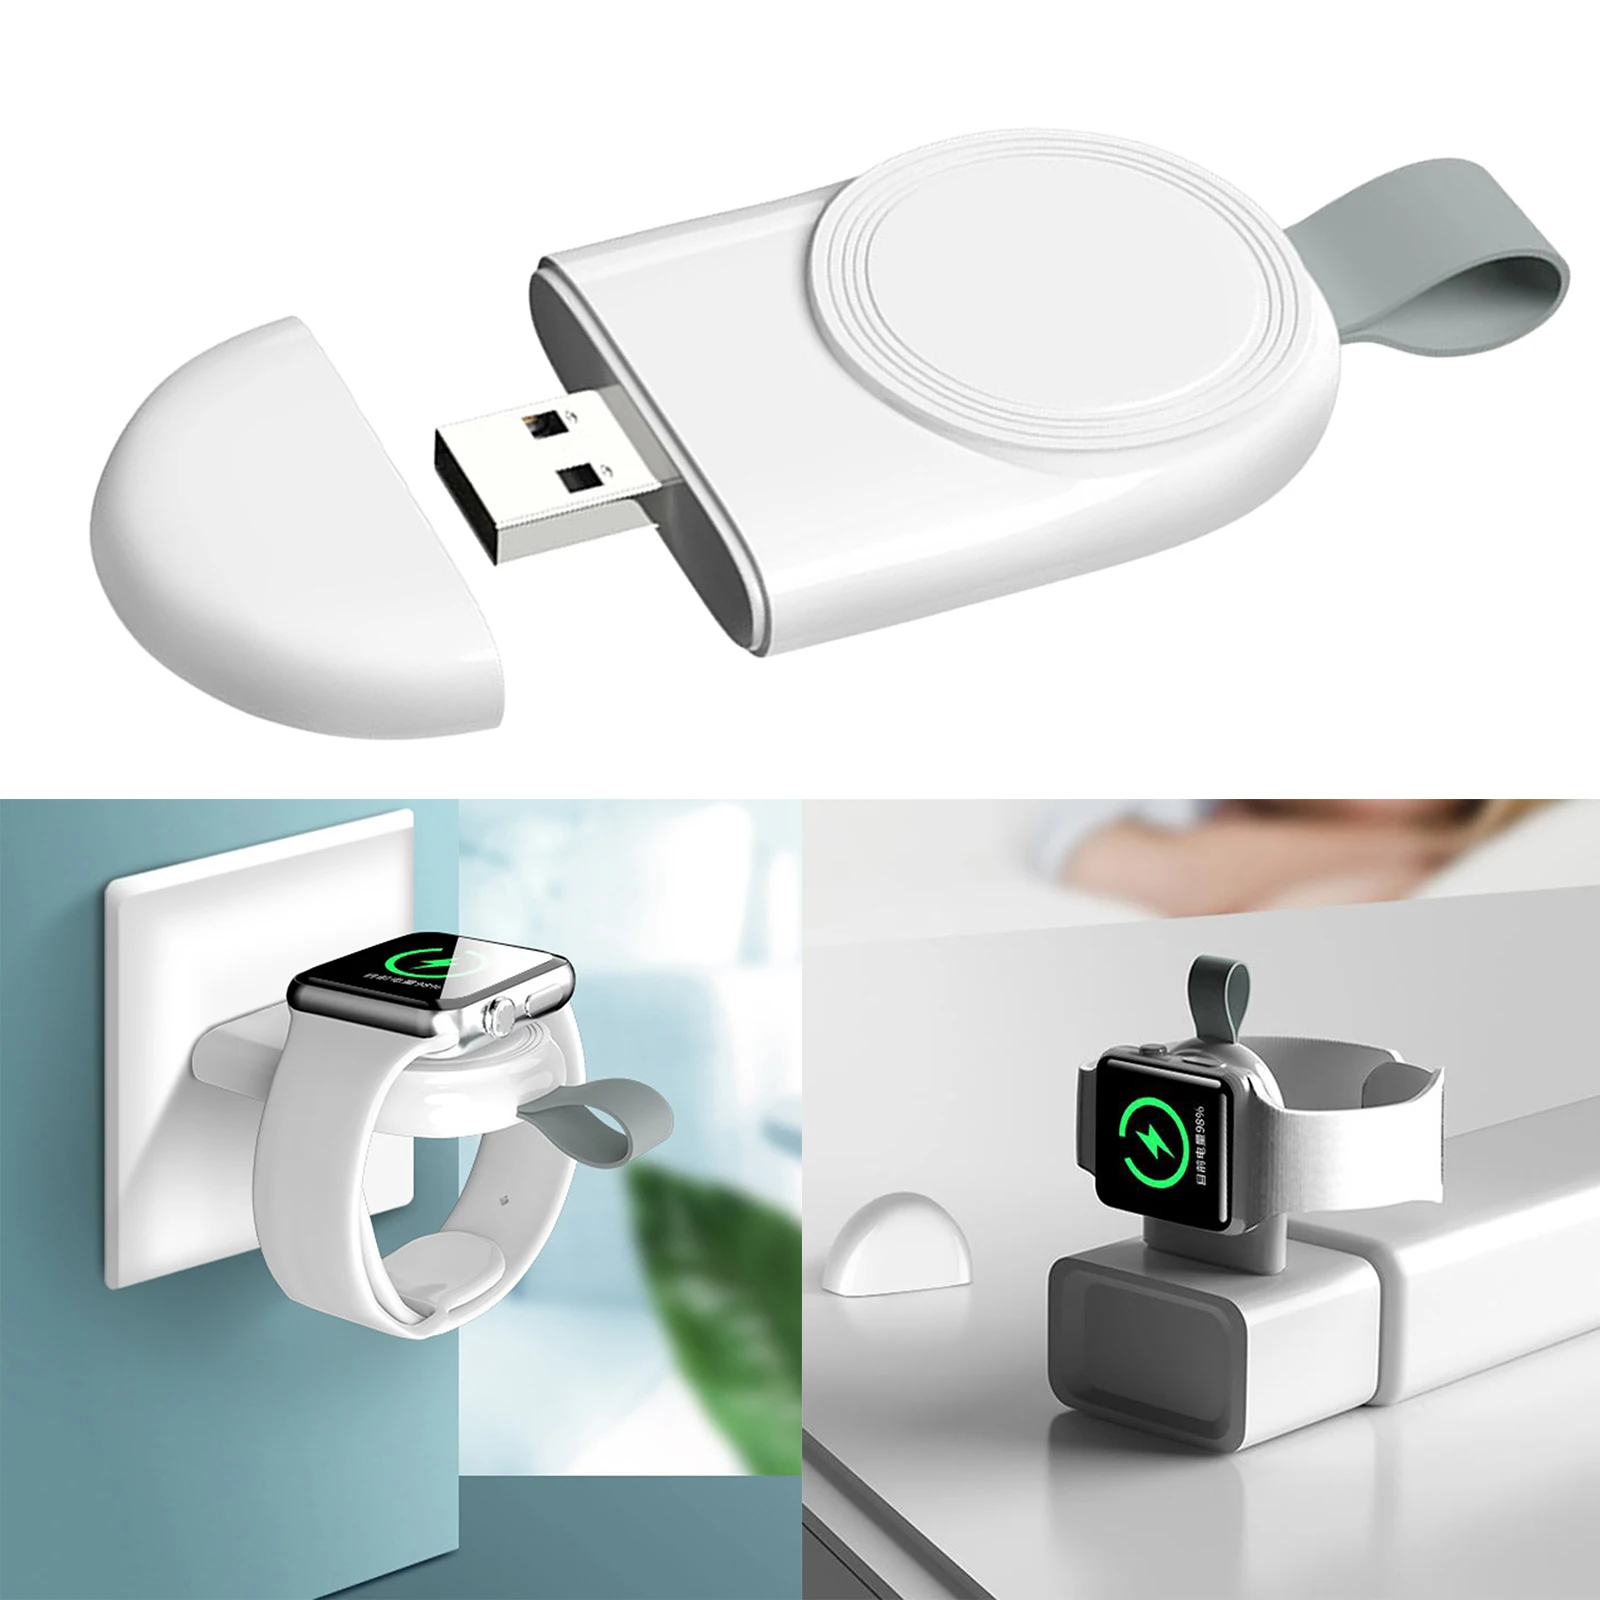 Portable Magnetic USB Wireless Charger For Apple Watch Series 1/2/3/4/5/6 White